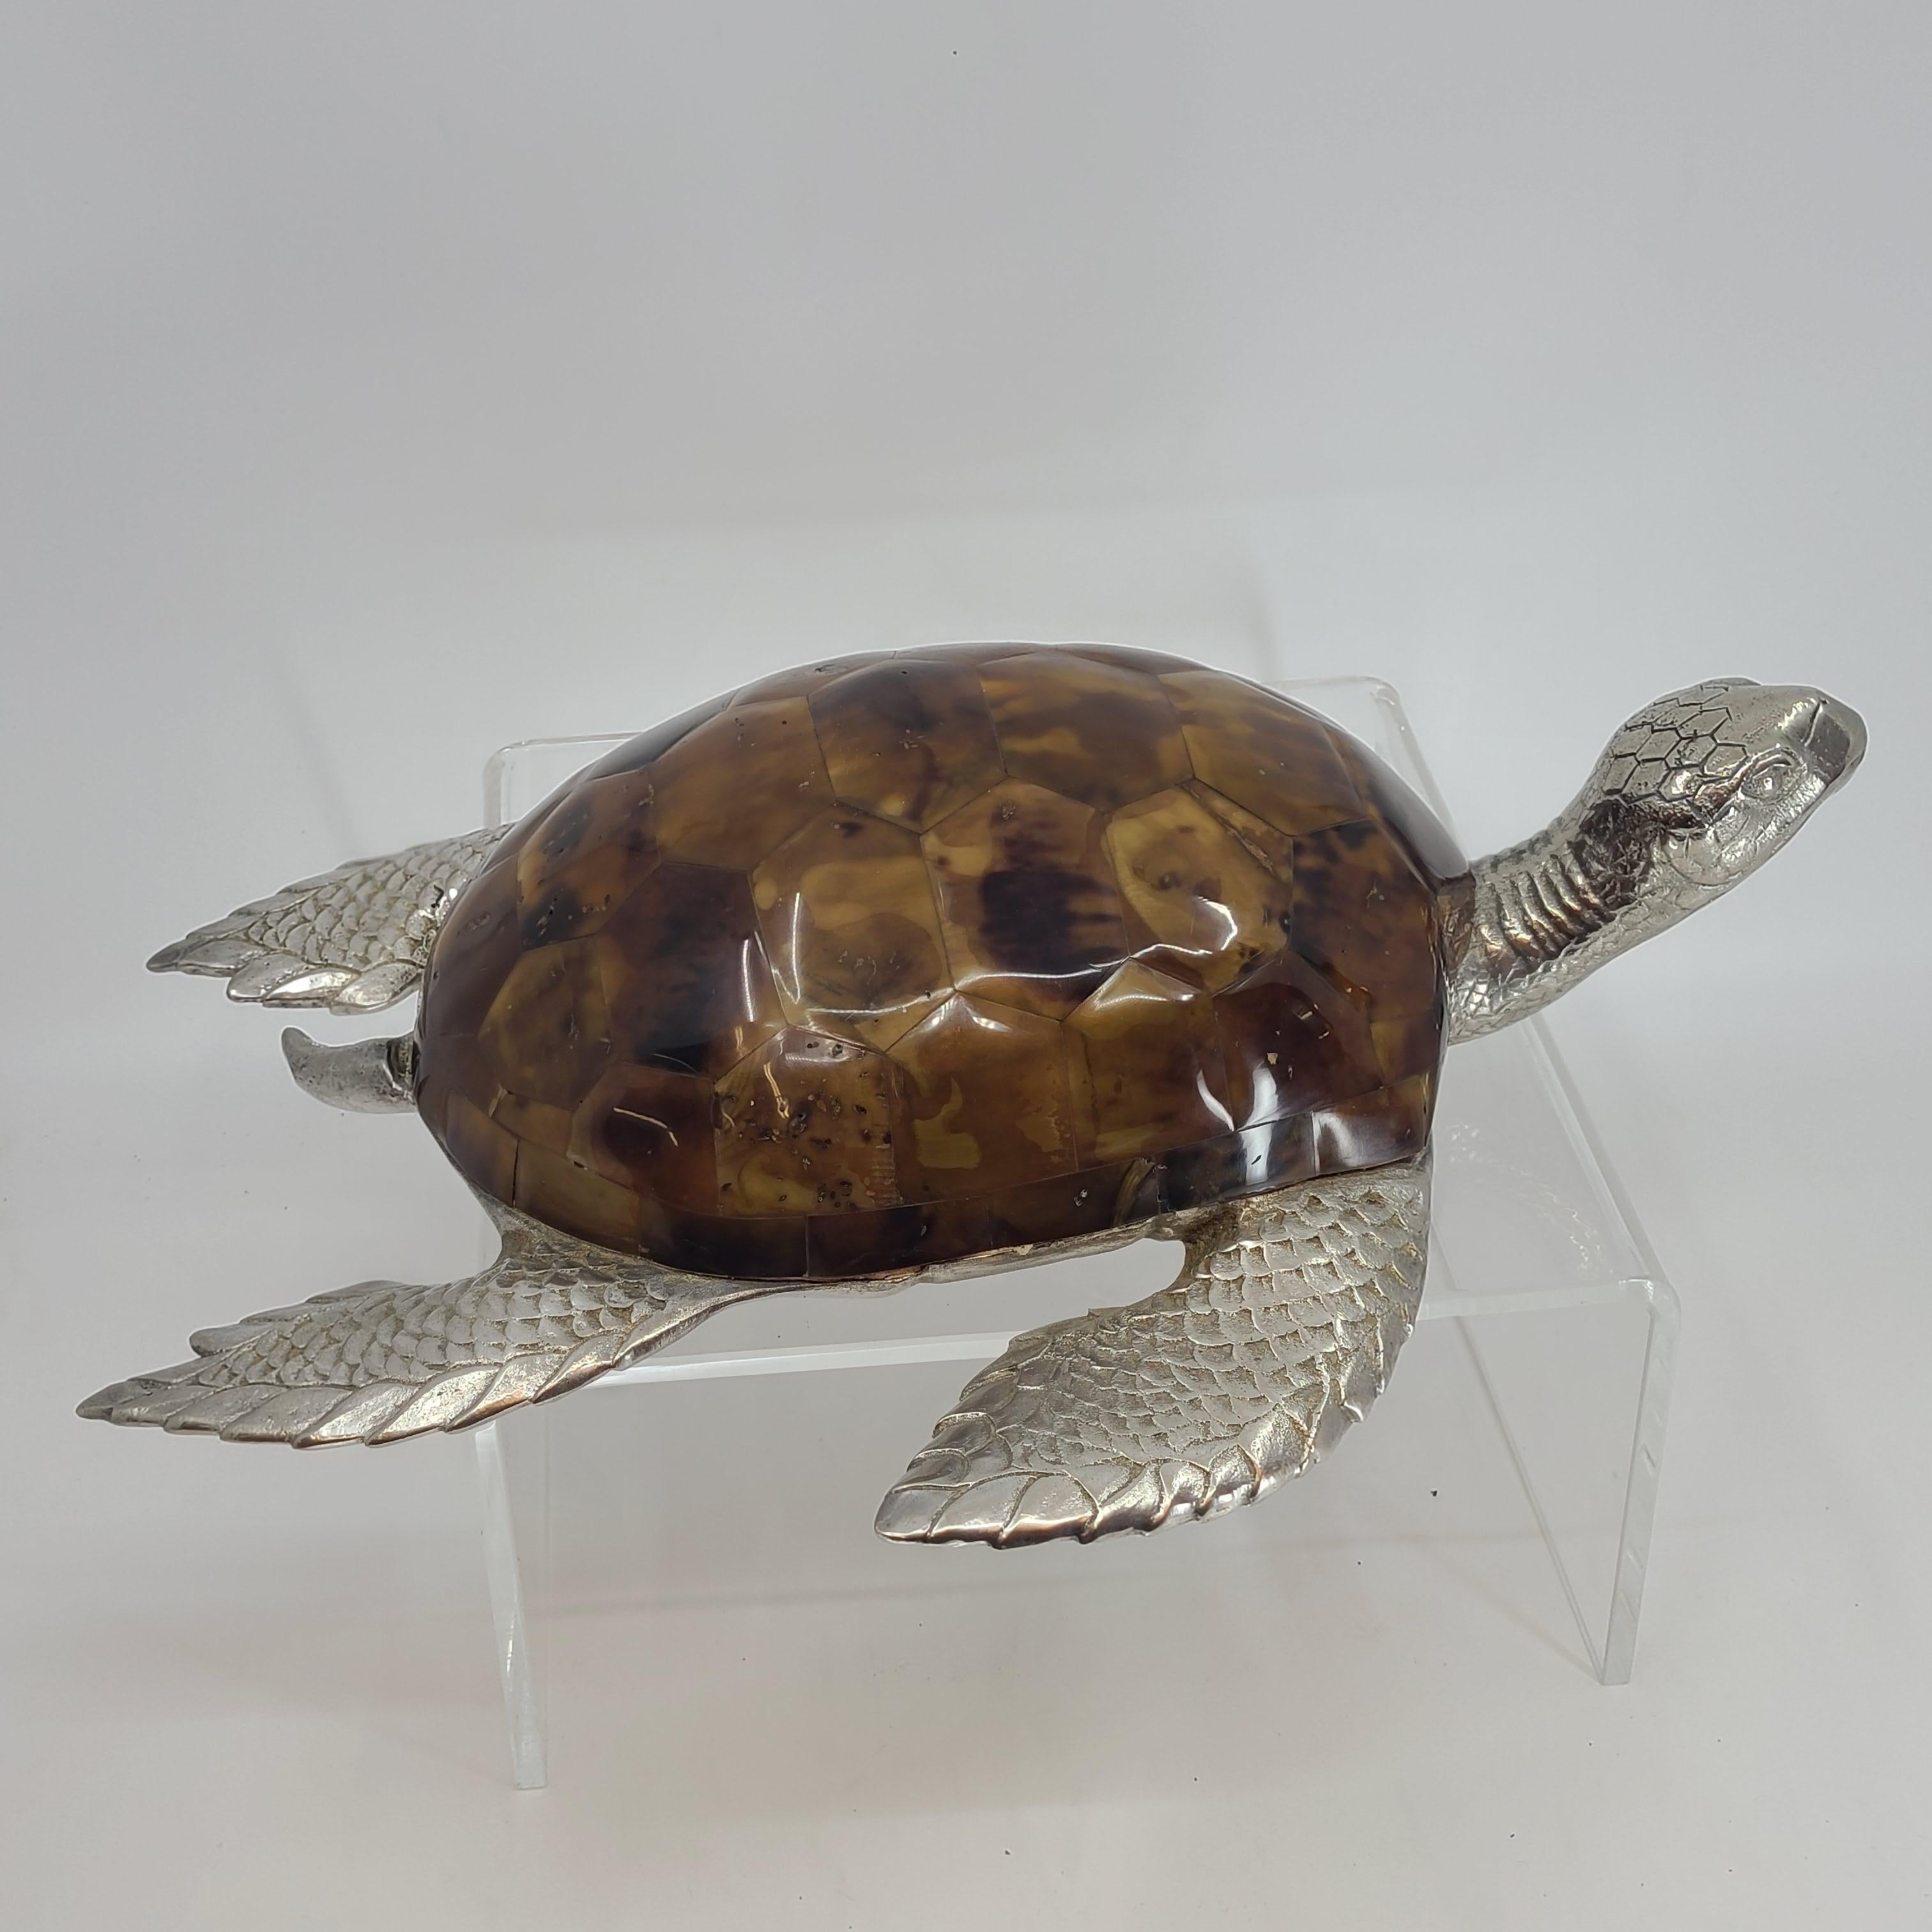 A beautiful silvered bronze and a faux tortoiseshell made from penshell table top sculpture, mid to late 1970s. Beautifully made and super stylish, and versatile. Could be used on a coffee table on an entrance table, or just about anywhere.